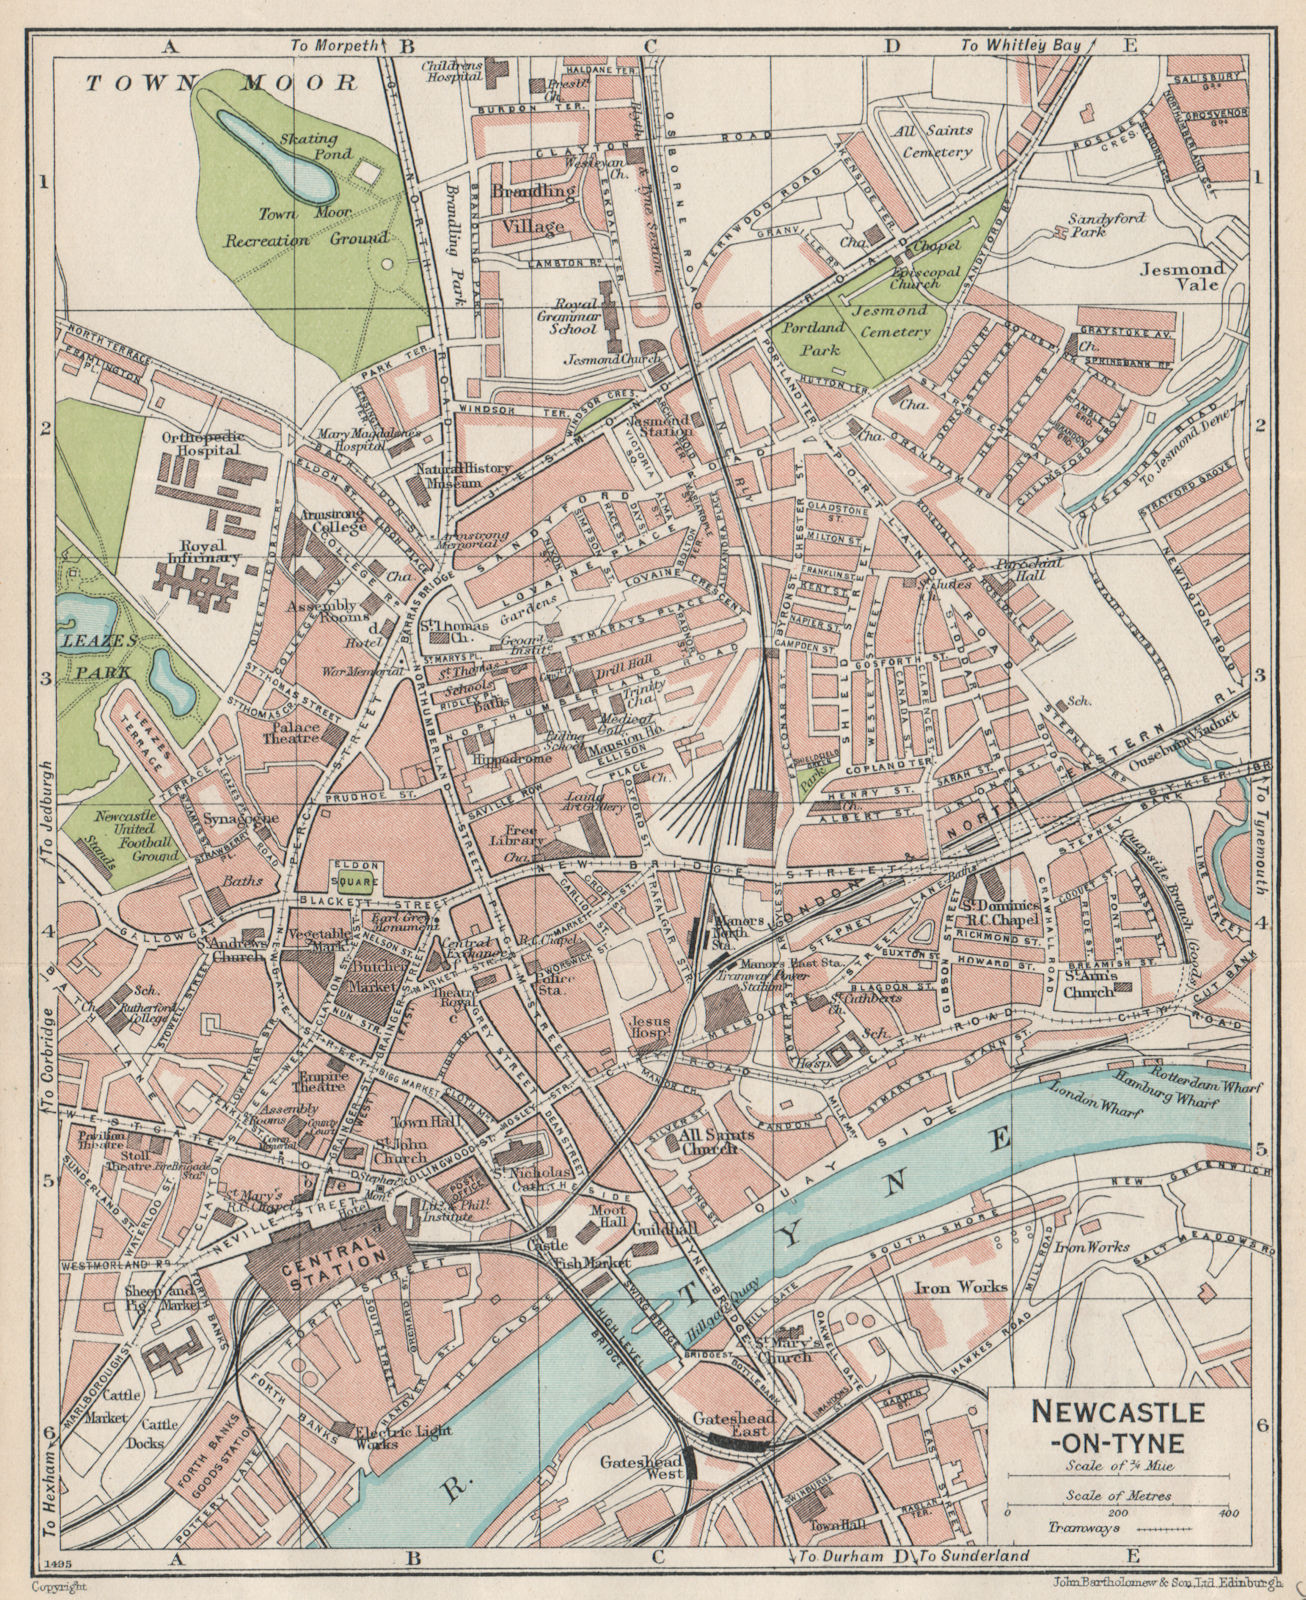 NEWCASTLE-ON-TYNE. Vintage town city map plan. Northumberland 1930 old